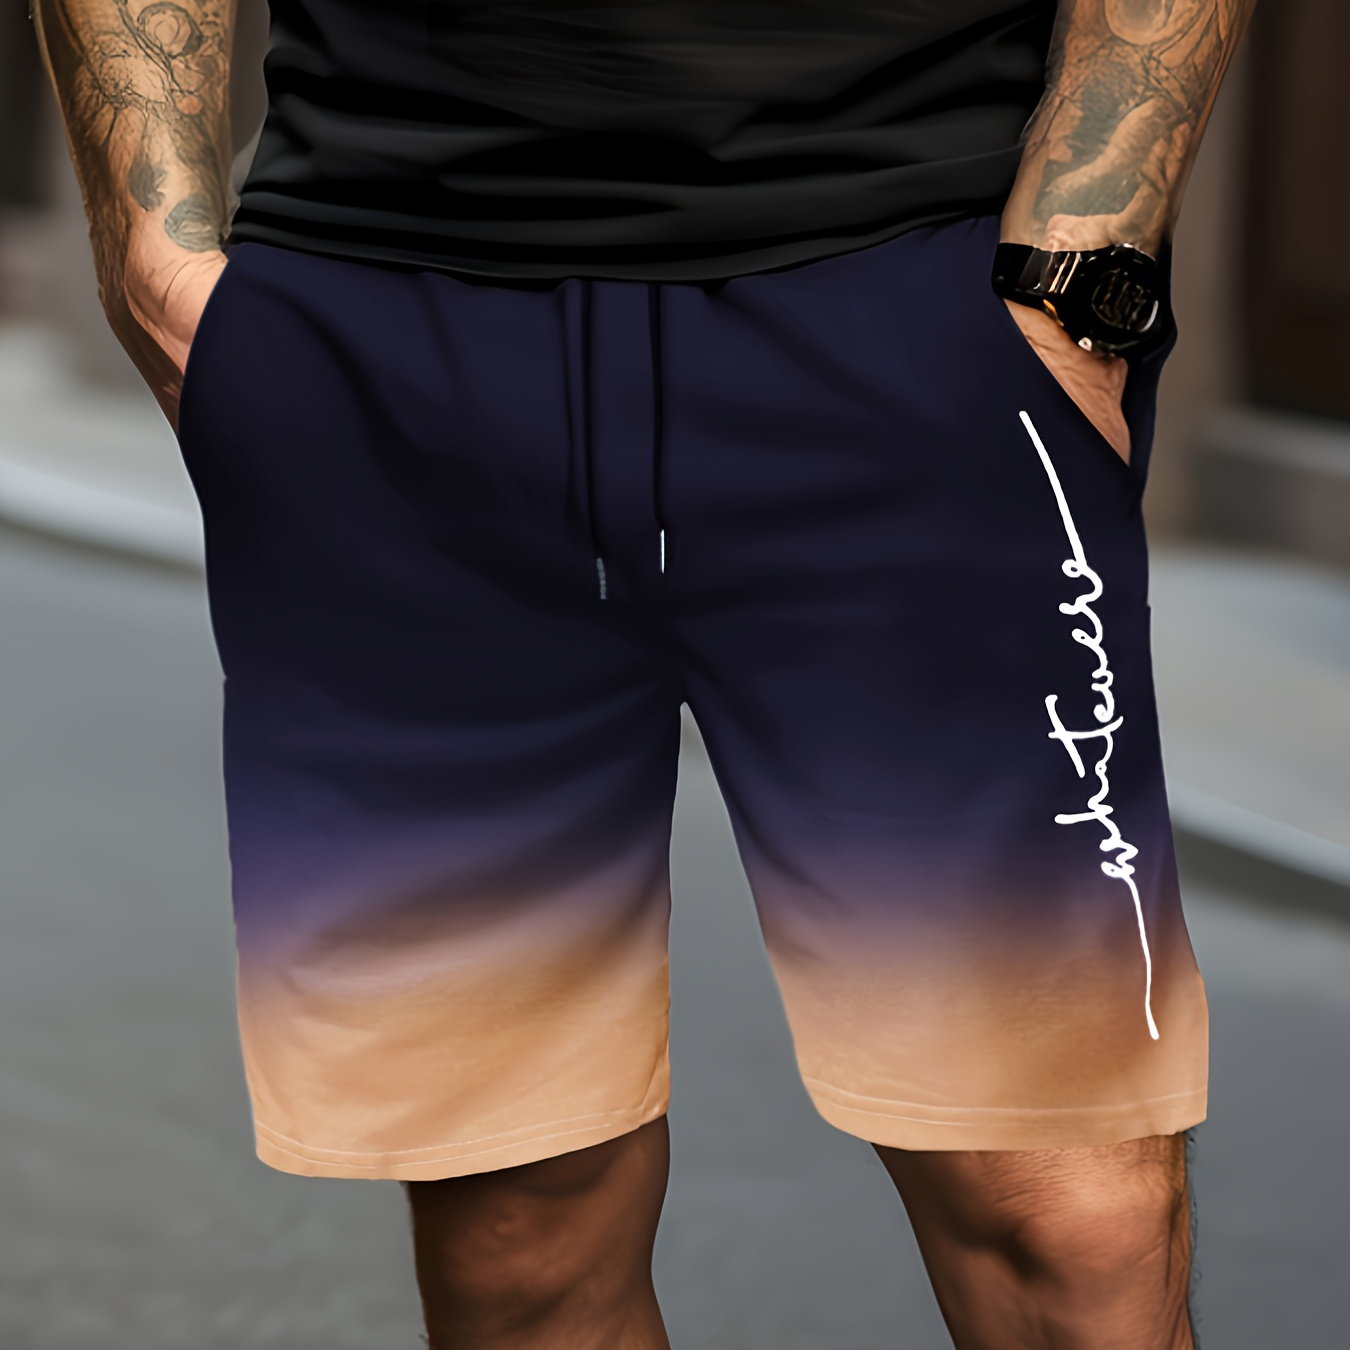 

Men's Gradient Color And Alphabet Print "whatever" Shorts With Drawstring And Pockets, Casual And Chic Shorts For Summer Outdoors Activities And Vacation